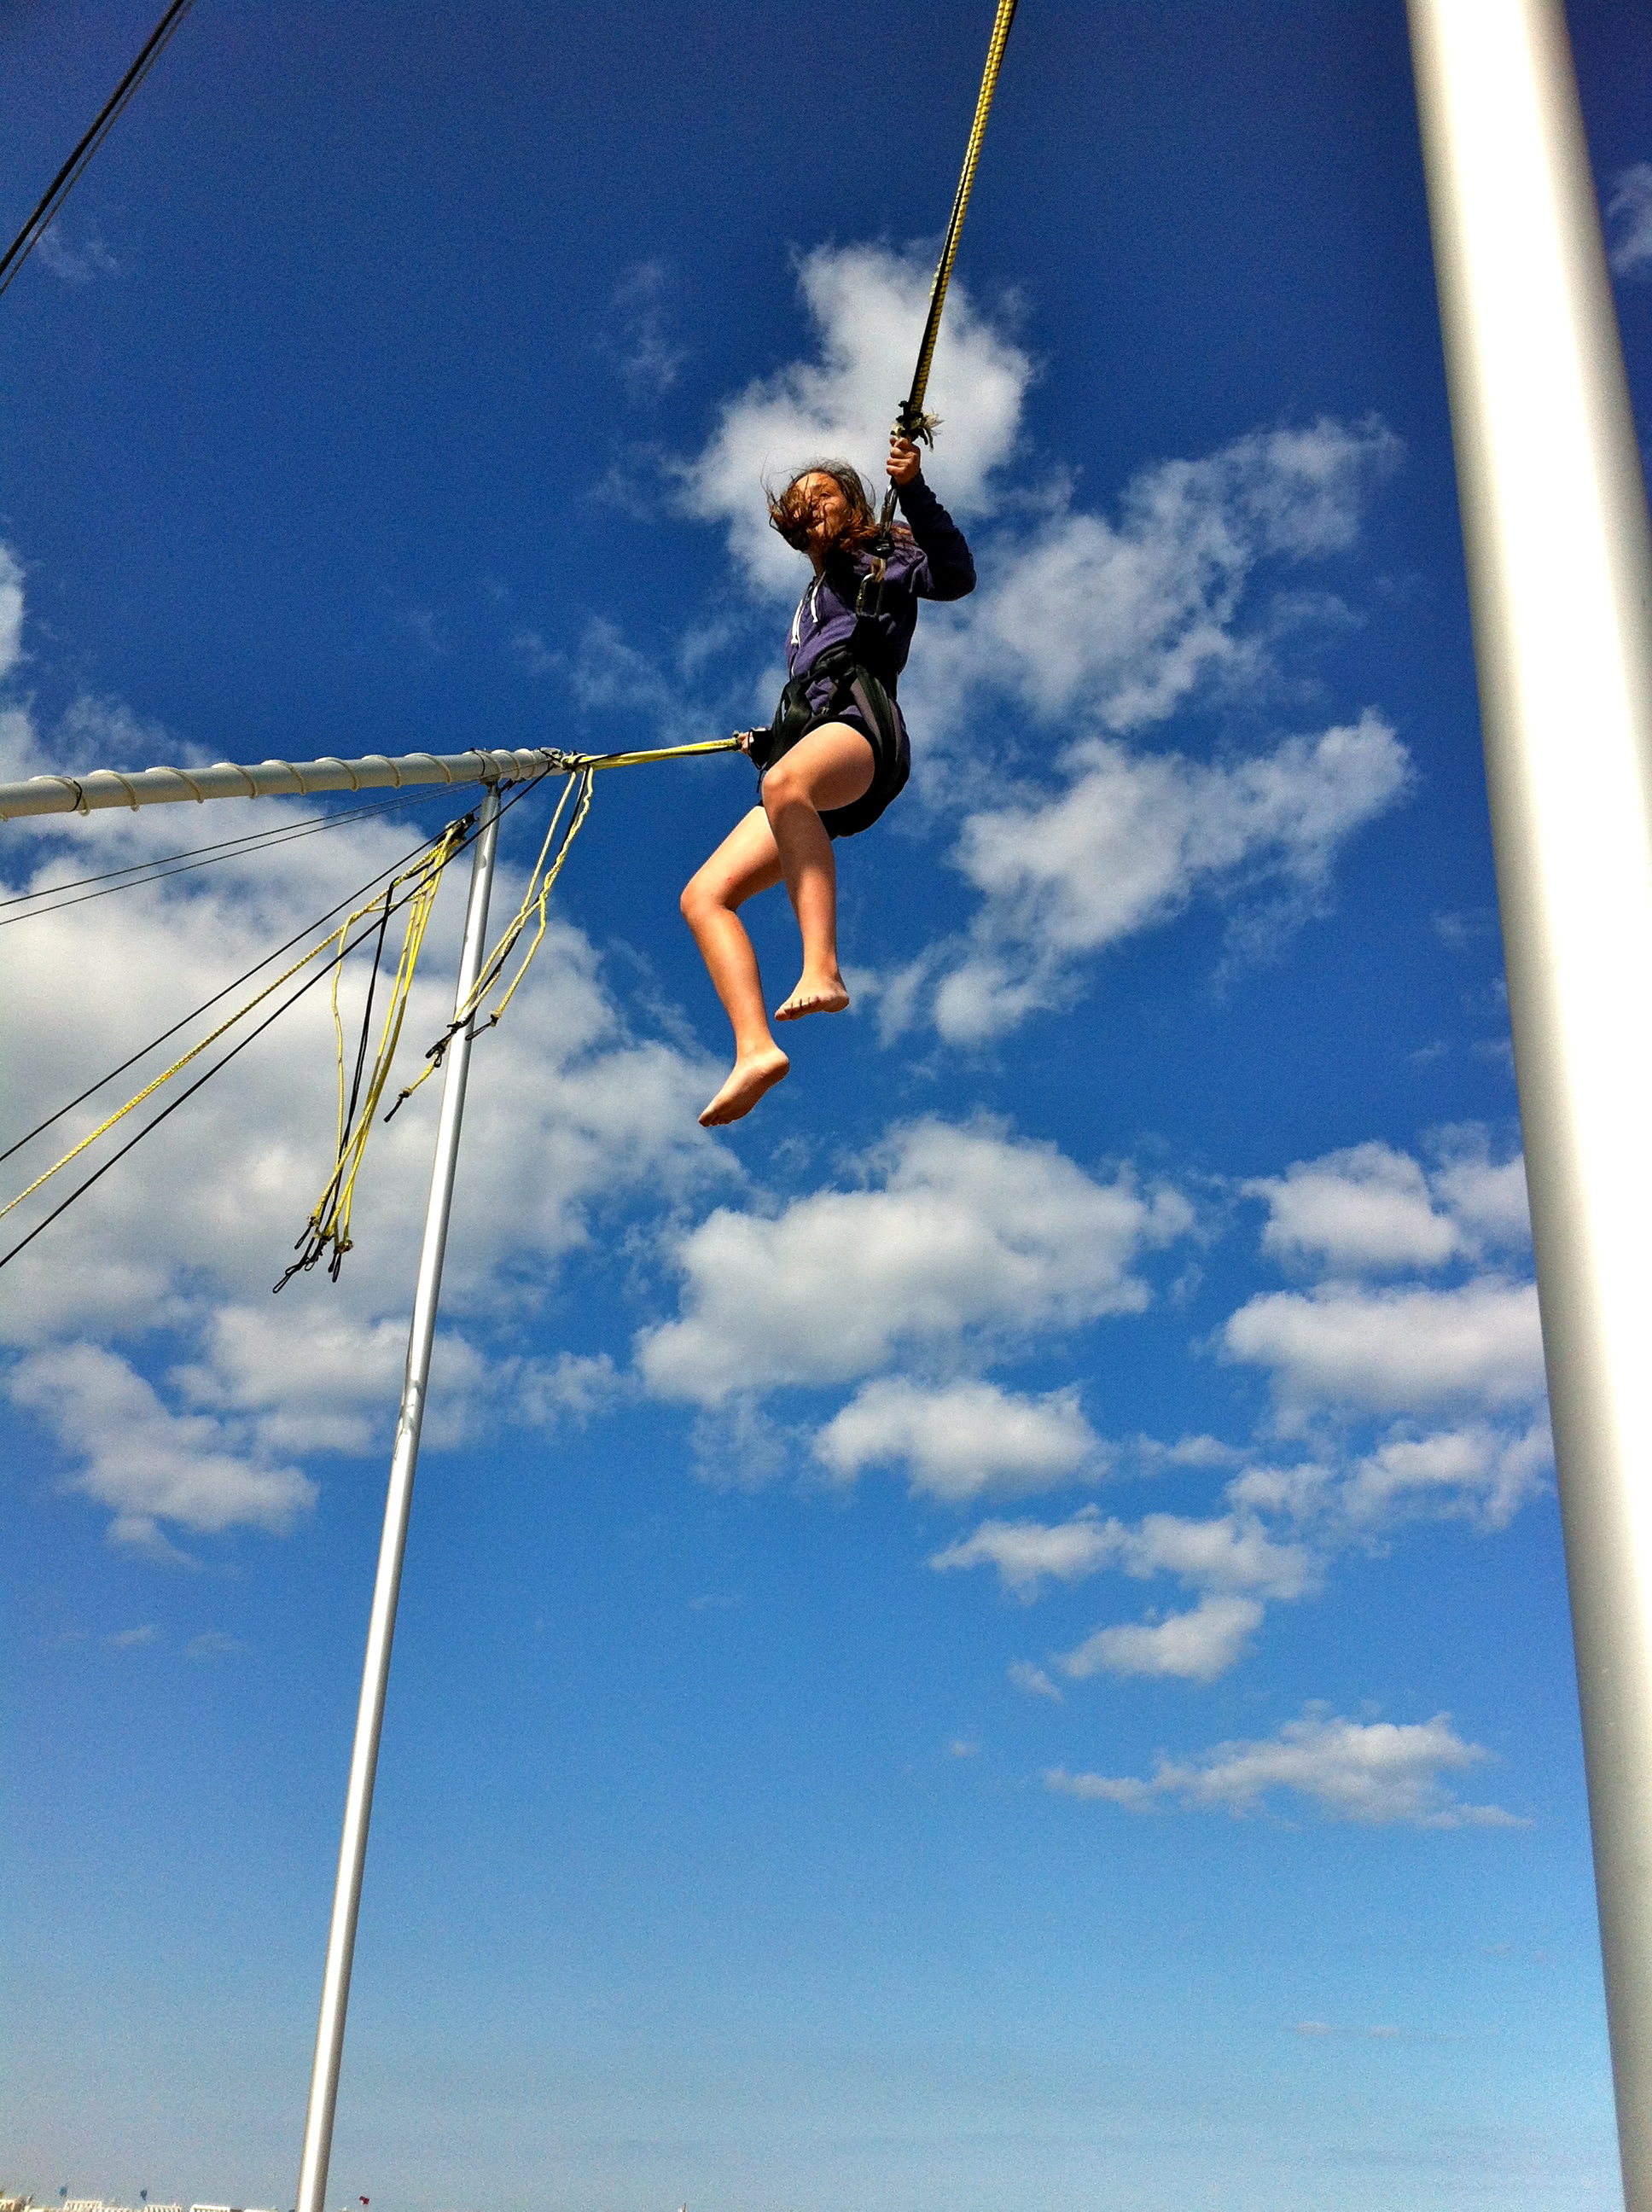 alt="girl in harness jumping up into the blue sky"